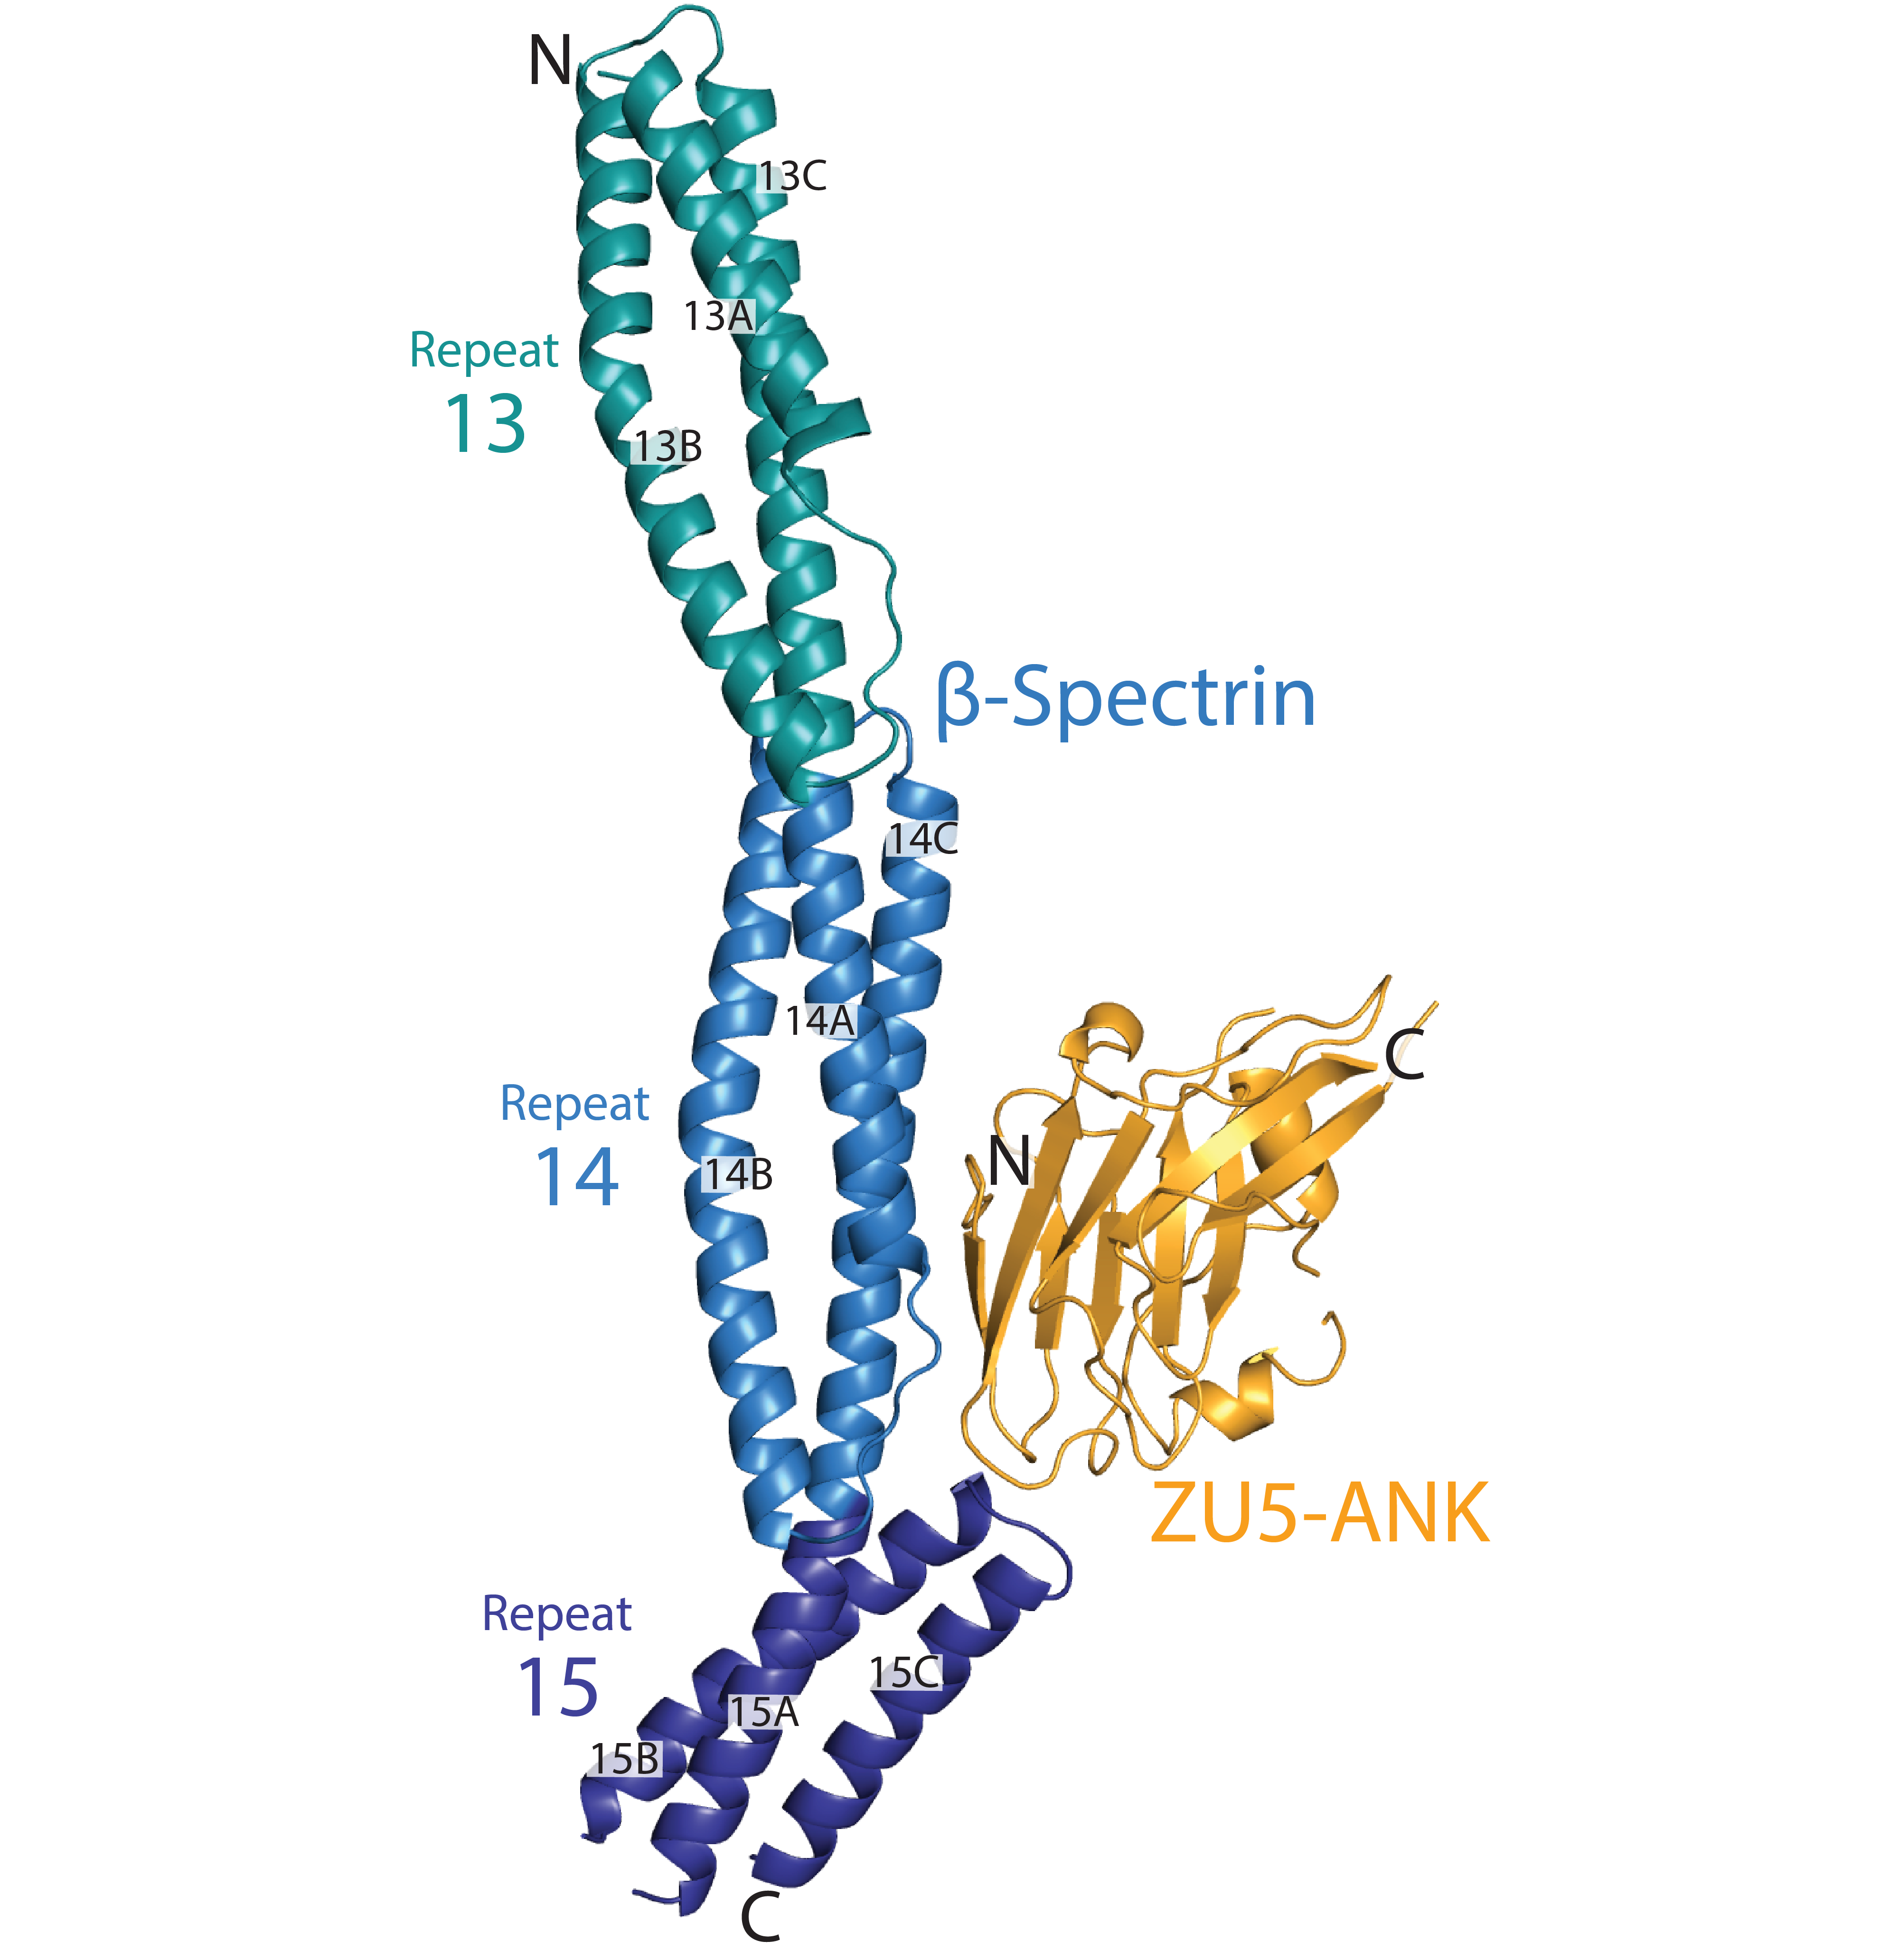 Structure of the spectrin/ankyrin complex